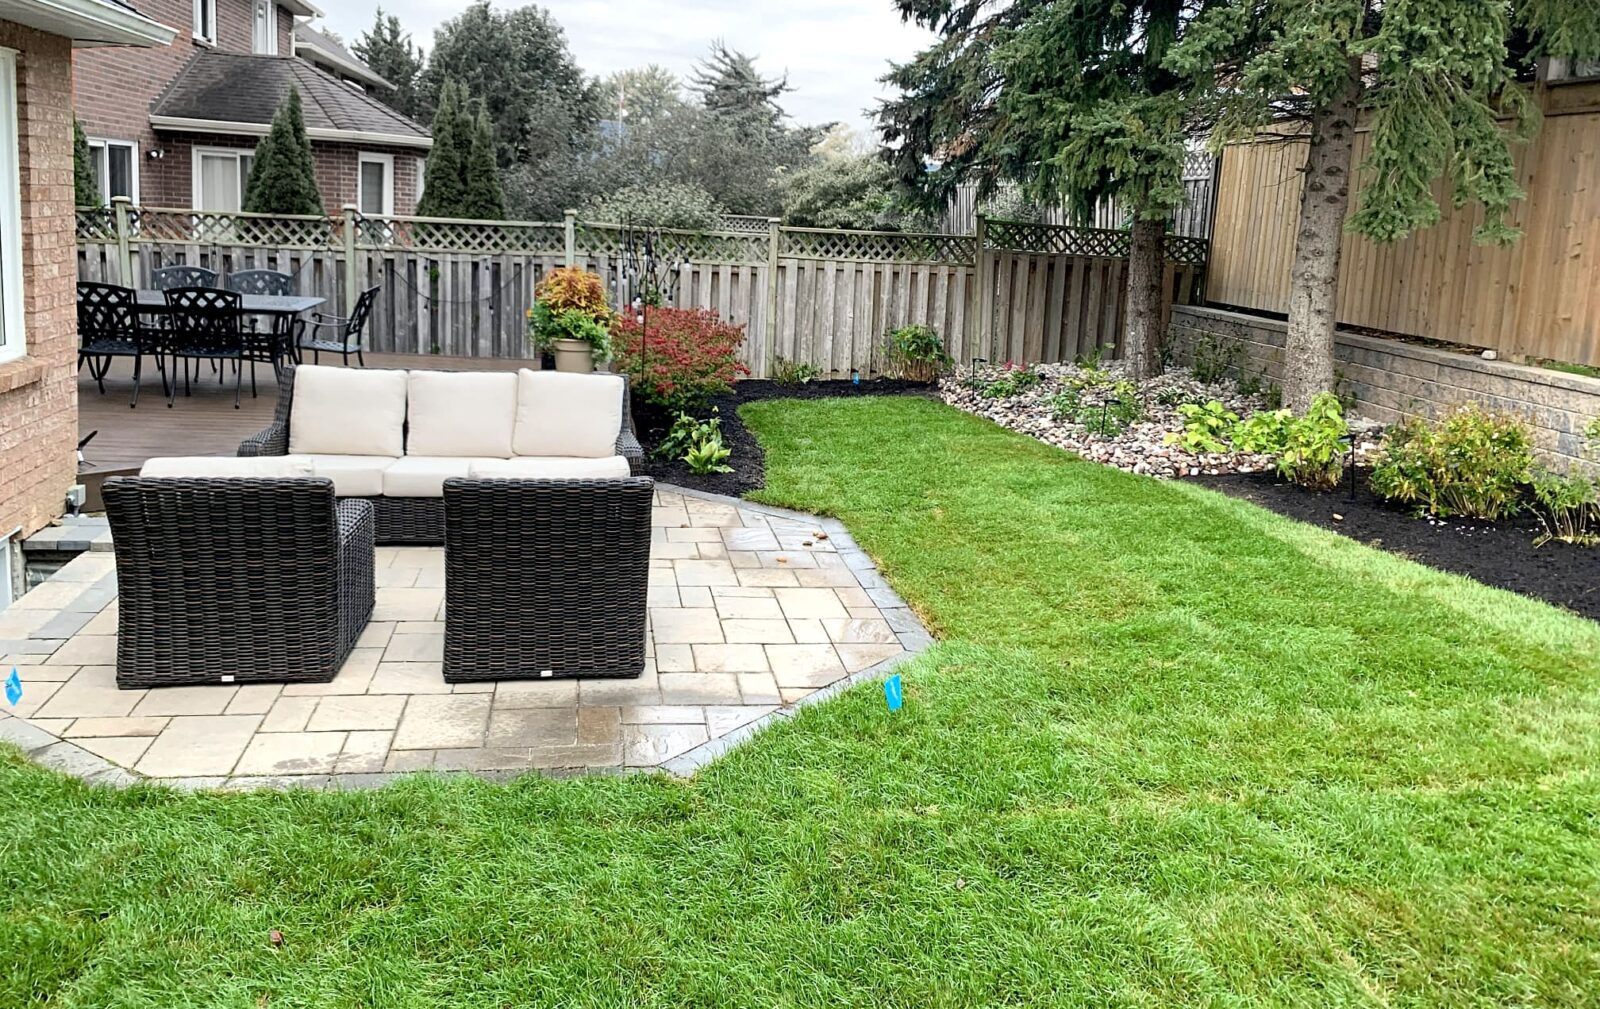 Lomota Gardening Project 4 -After. Beautifully manicured lawn and garden with comfortable wicker chairs and sofa on octagonal patio stones.